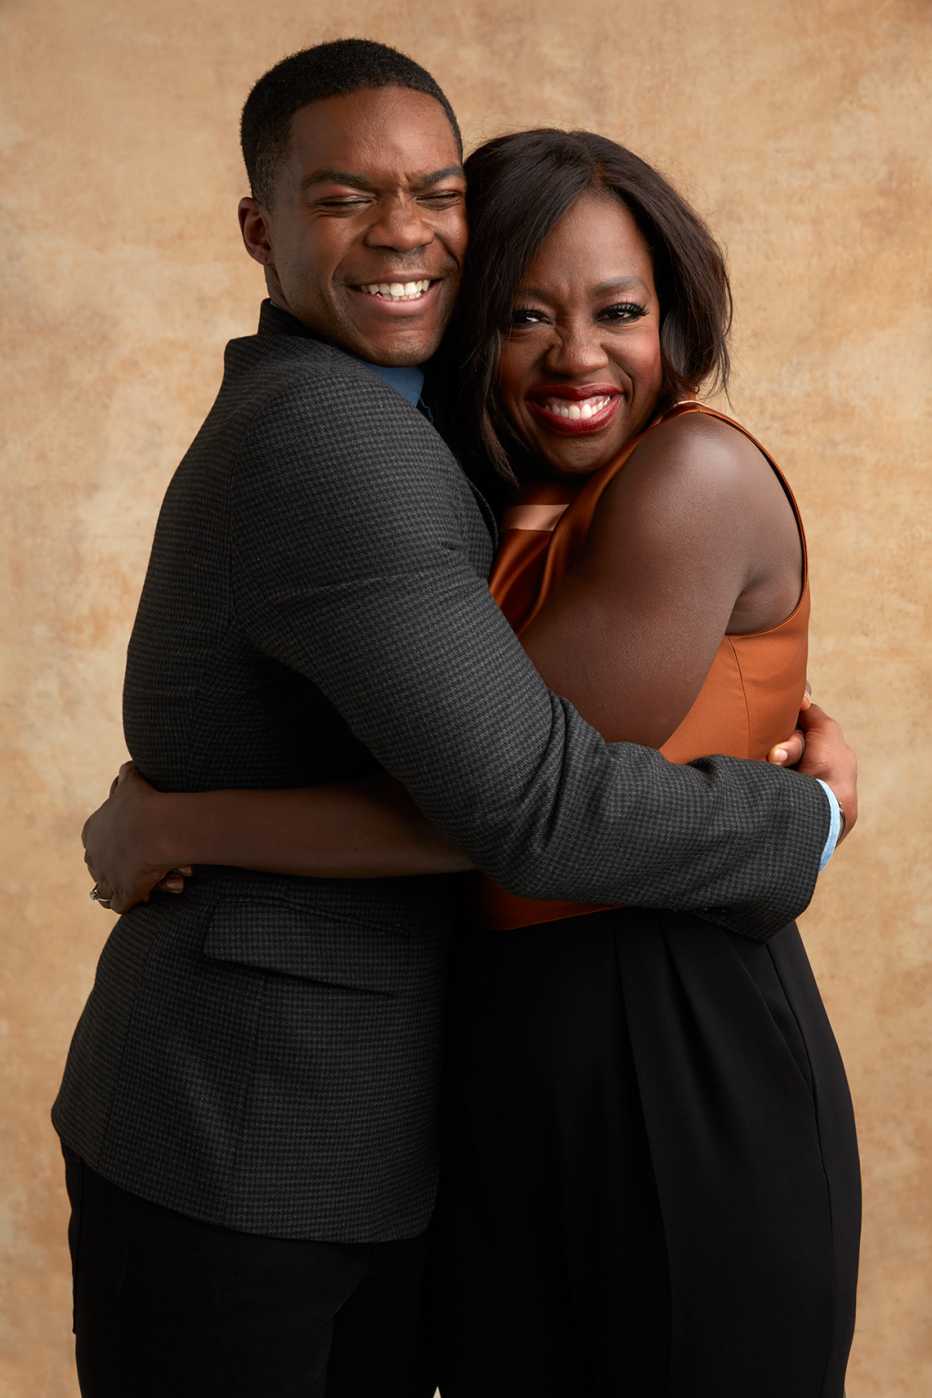 Jovan Adepo and Viola Davis at the 16th Annual AARP The Magazine's Movies for Grownups Awards